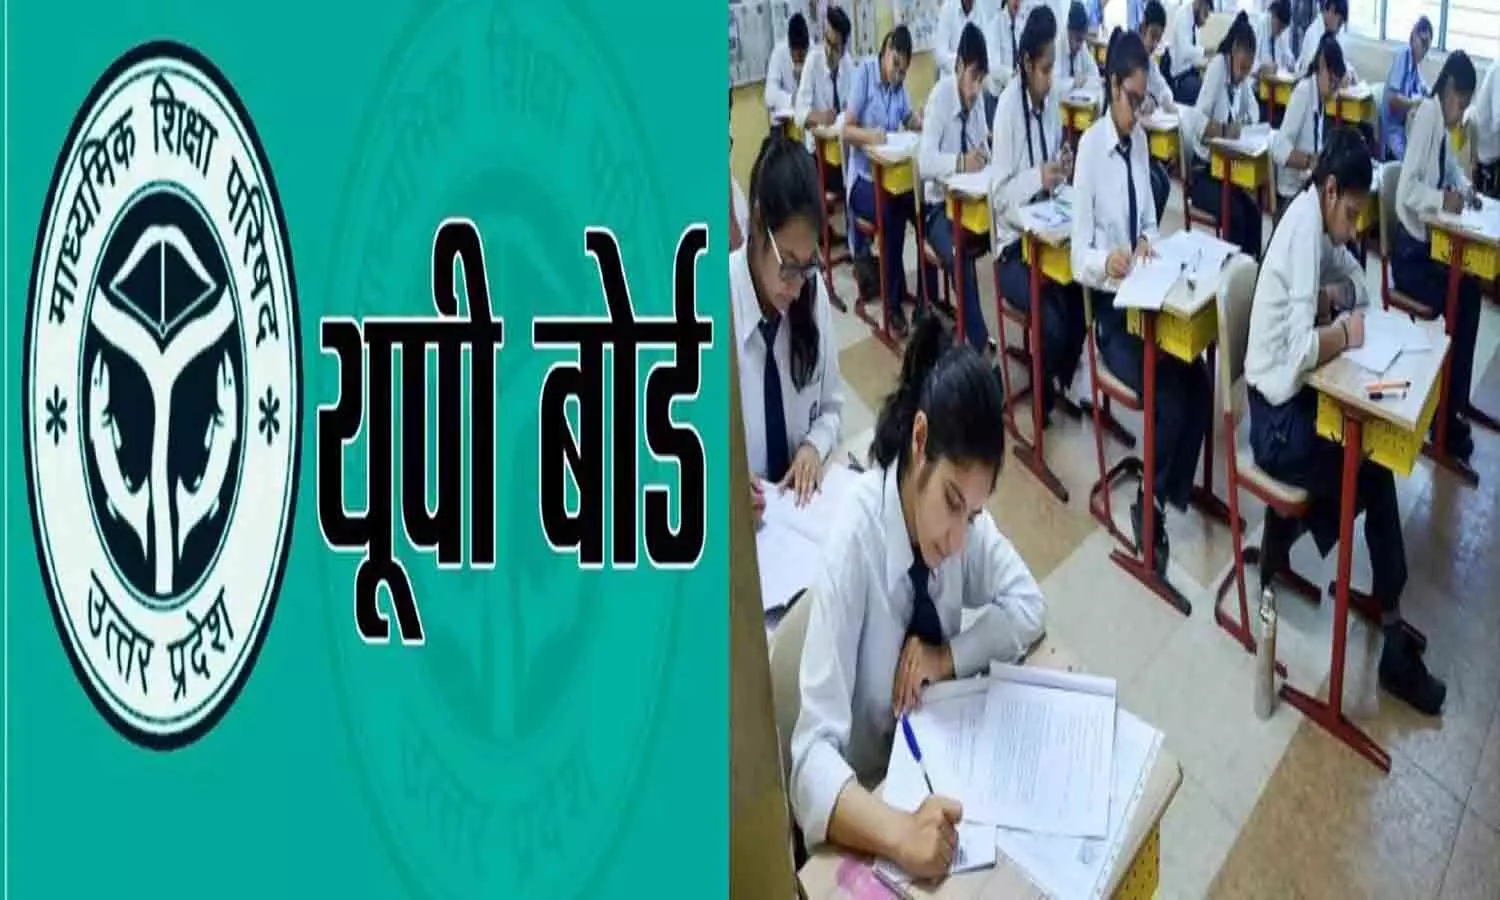 UP Board Exam Paper Leak: Intermediate English exam to be held on April 13